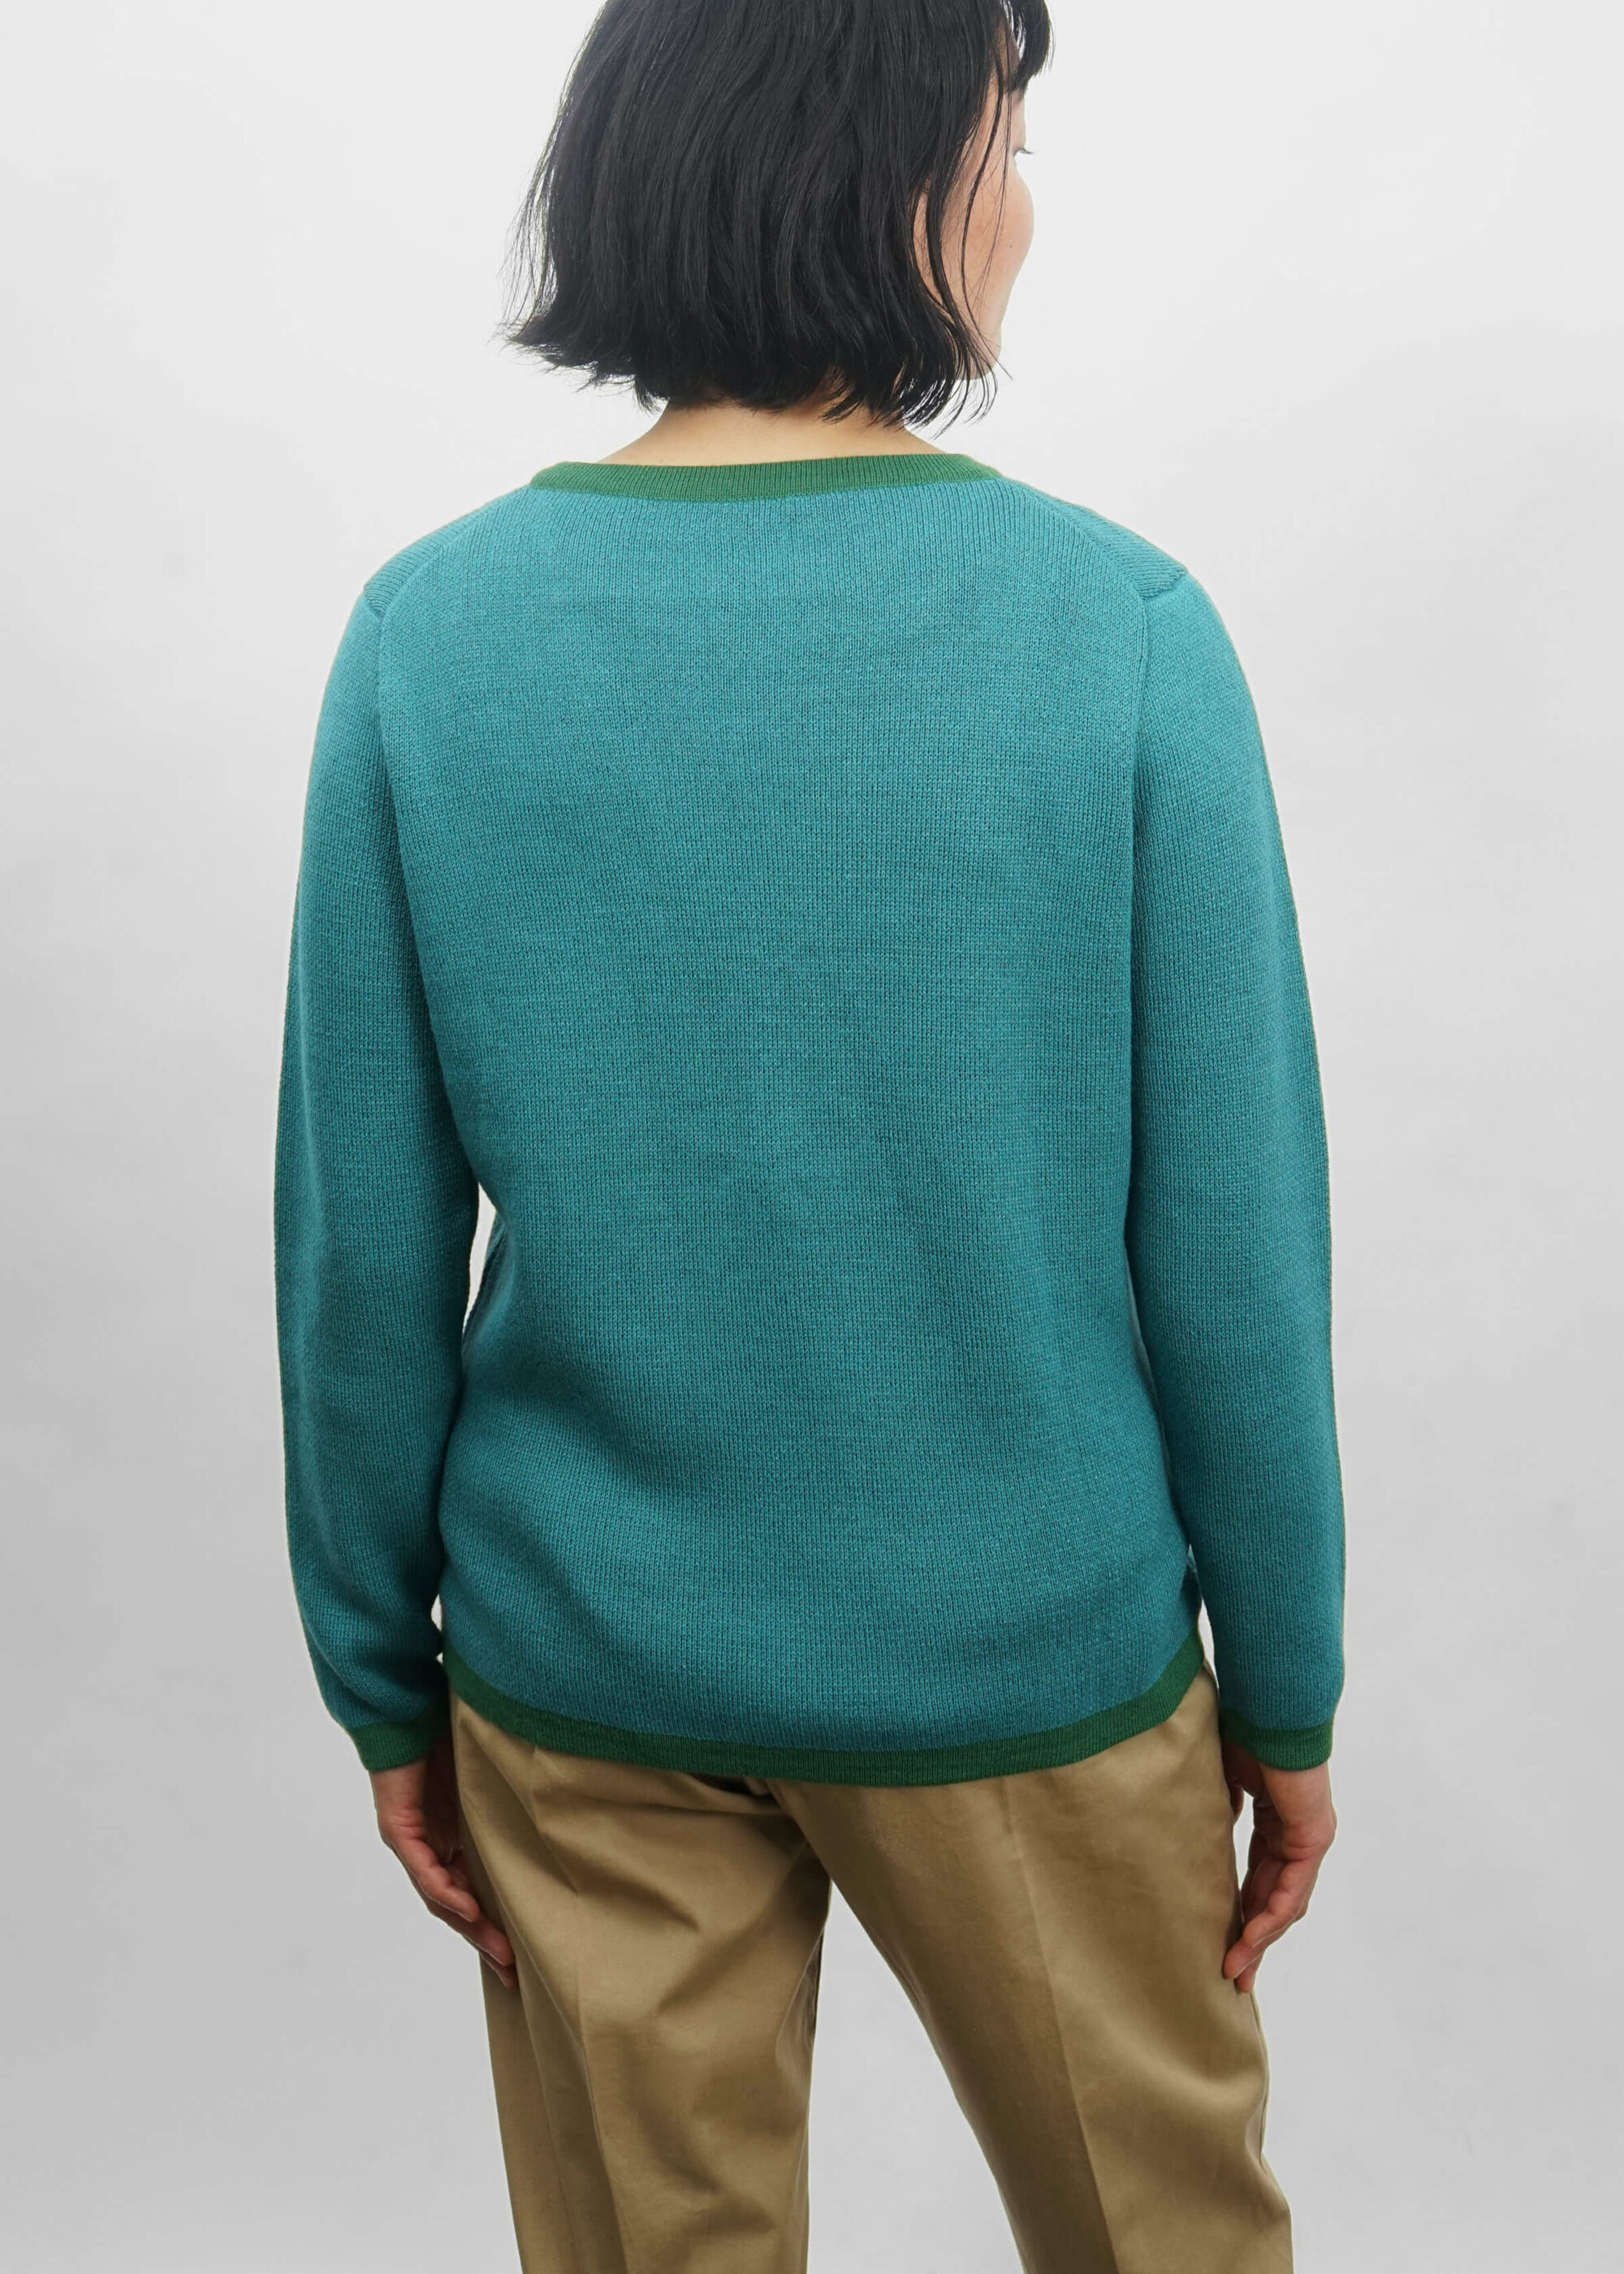 Product image for »Hockney« Turquoise Green Sweater | 100% Baby Alpaca